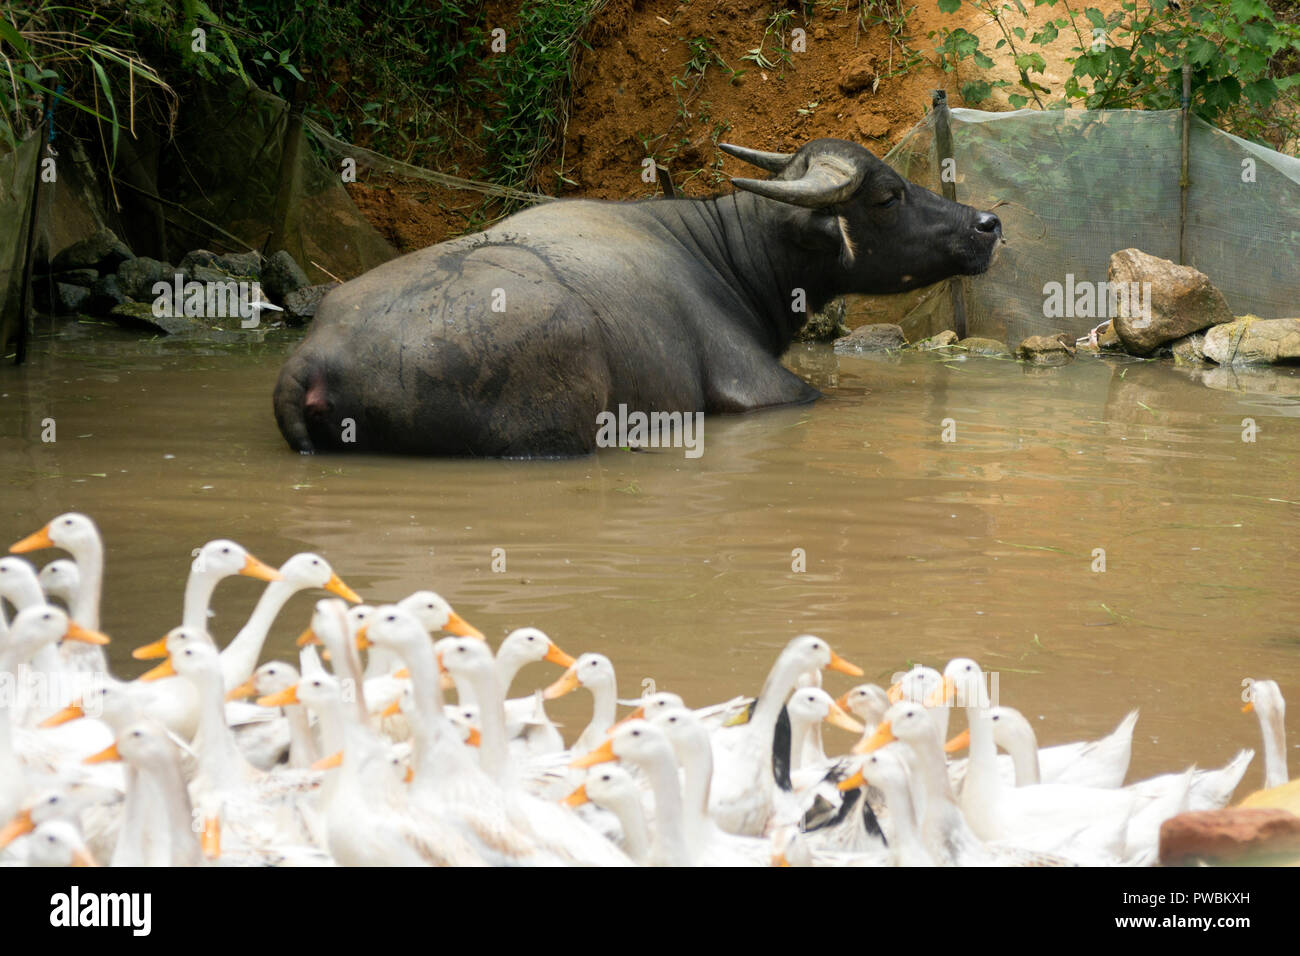 Vietnamese Water Buffalo and a group of white geese , Sa Pa, Vietnam Stock Photo